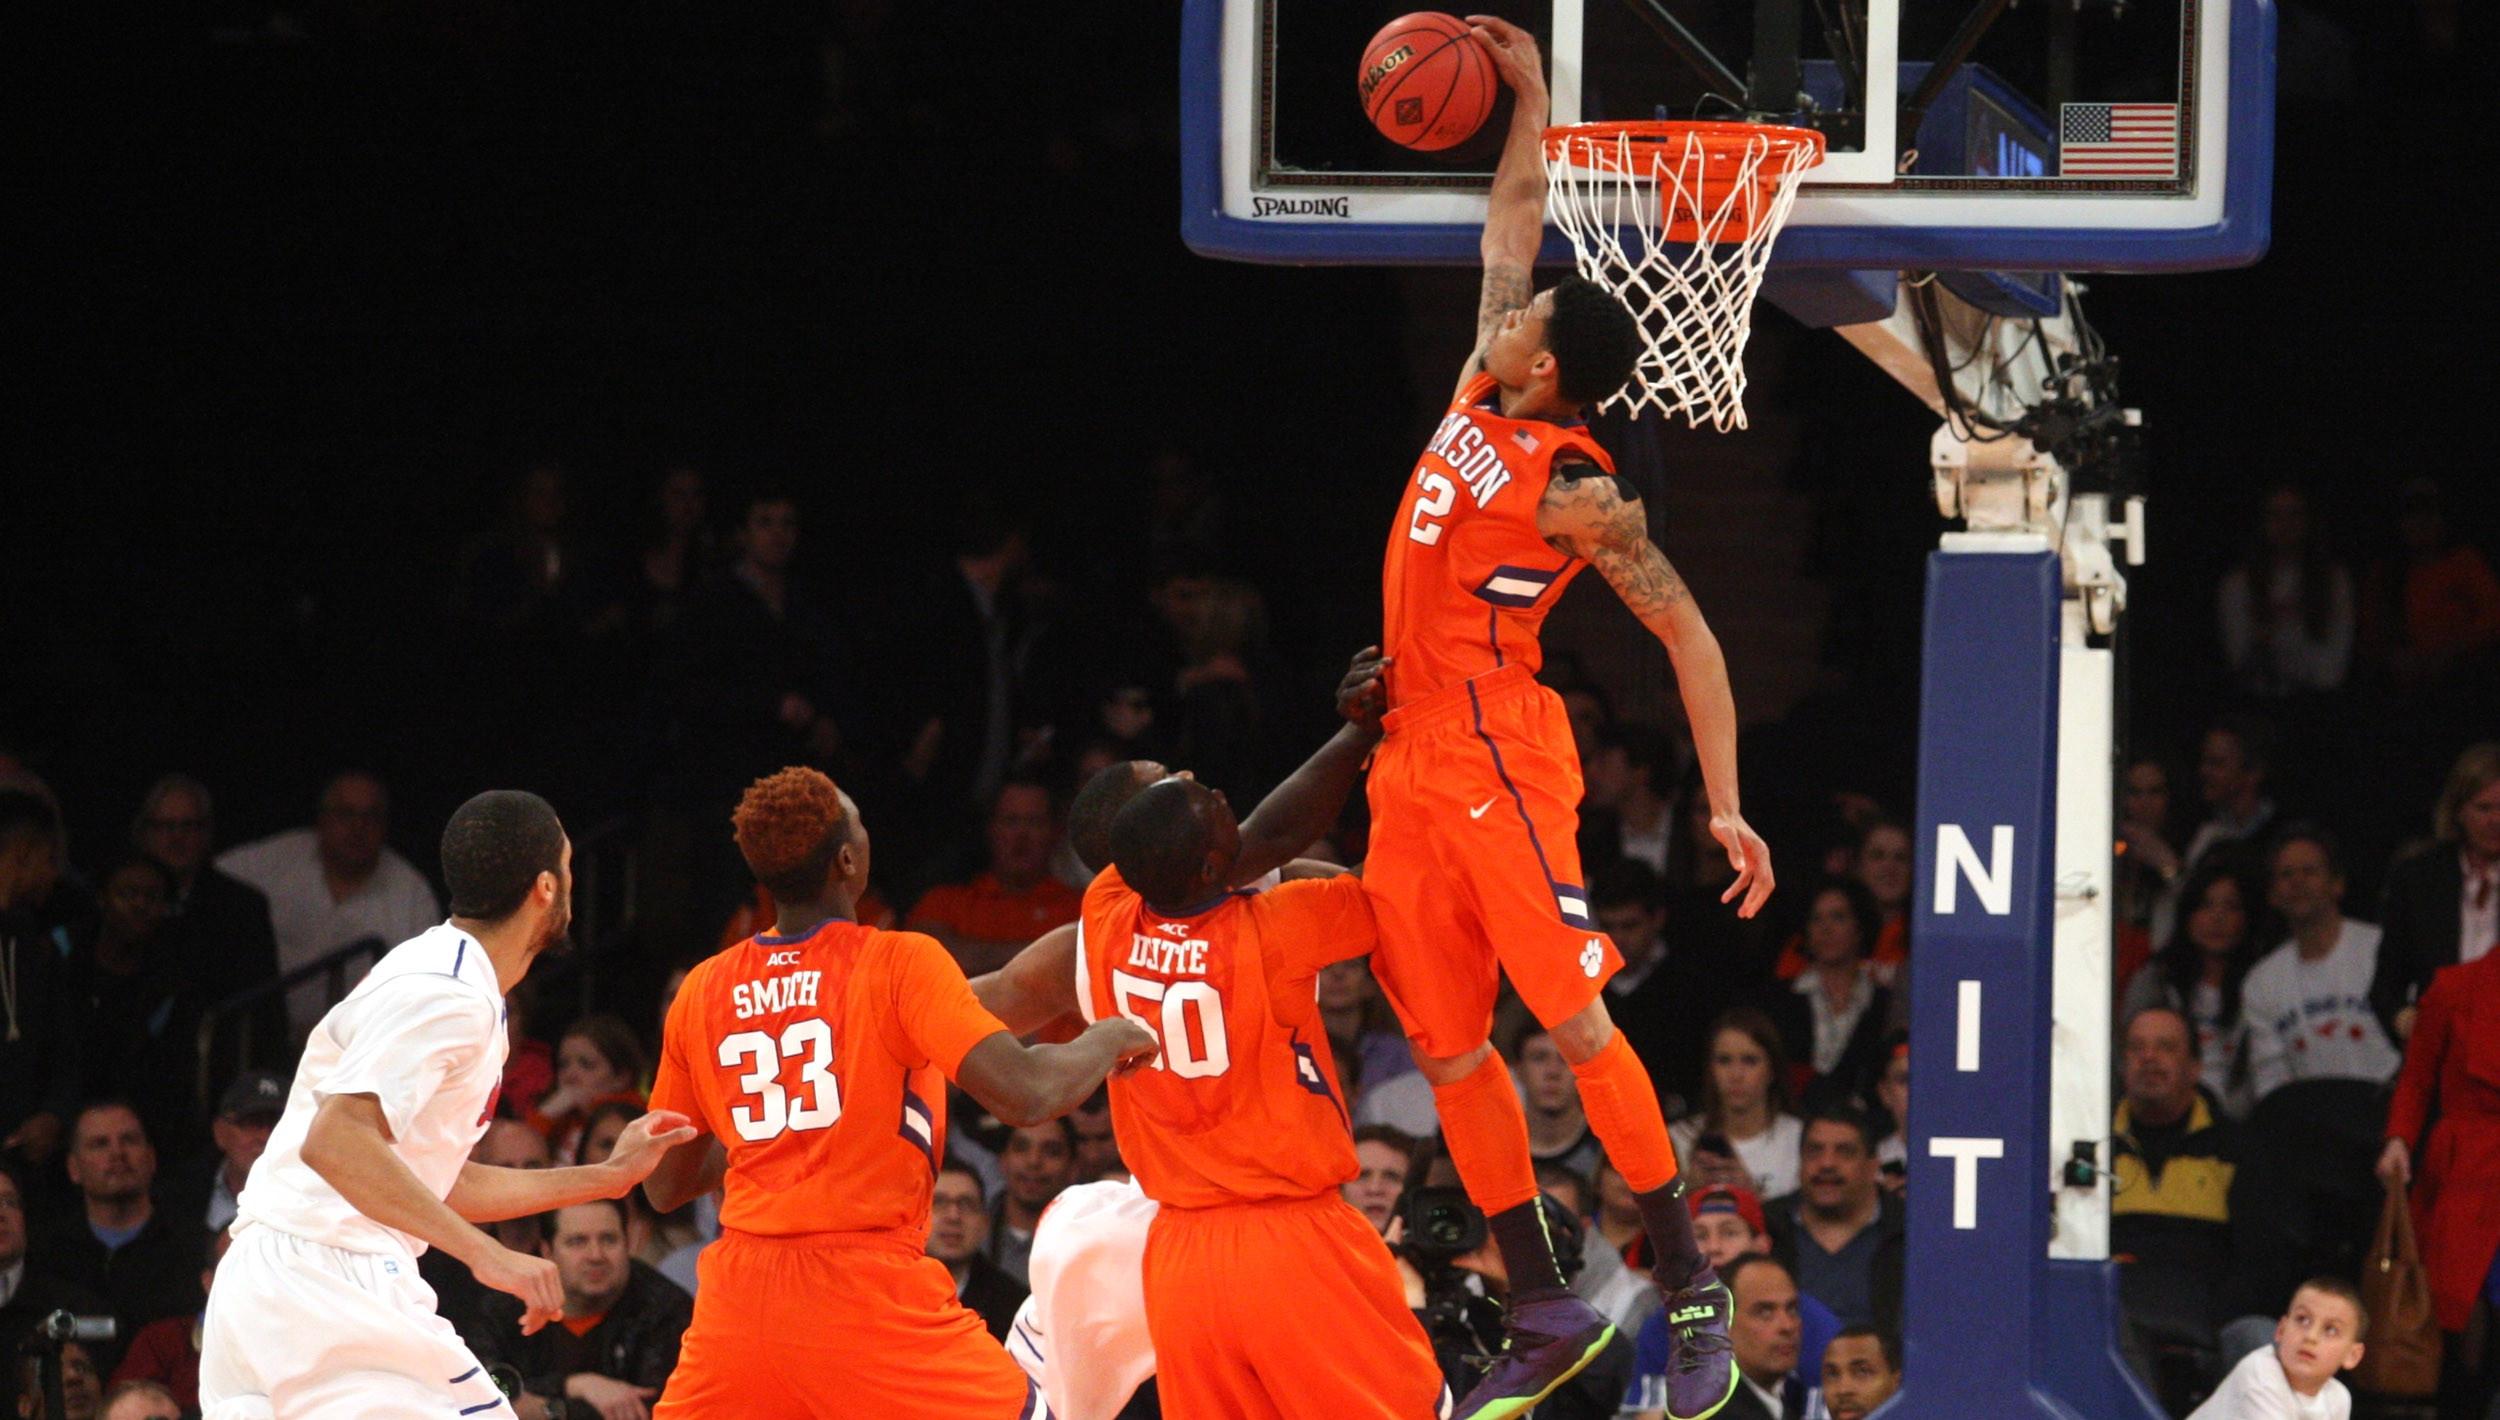 FEATURE: Tigers’ Season of Progress Comes to End in NIT Semis